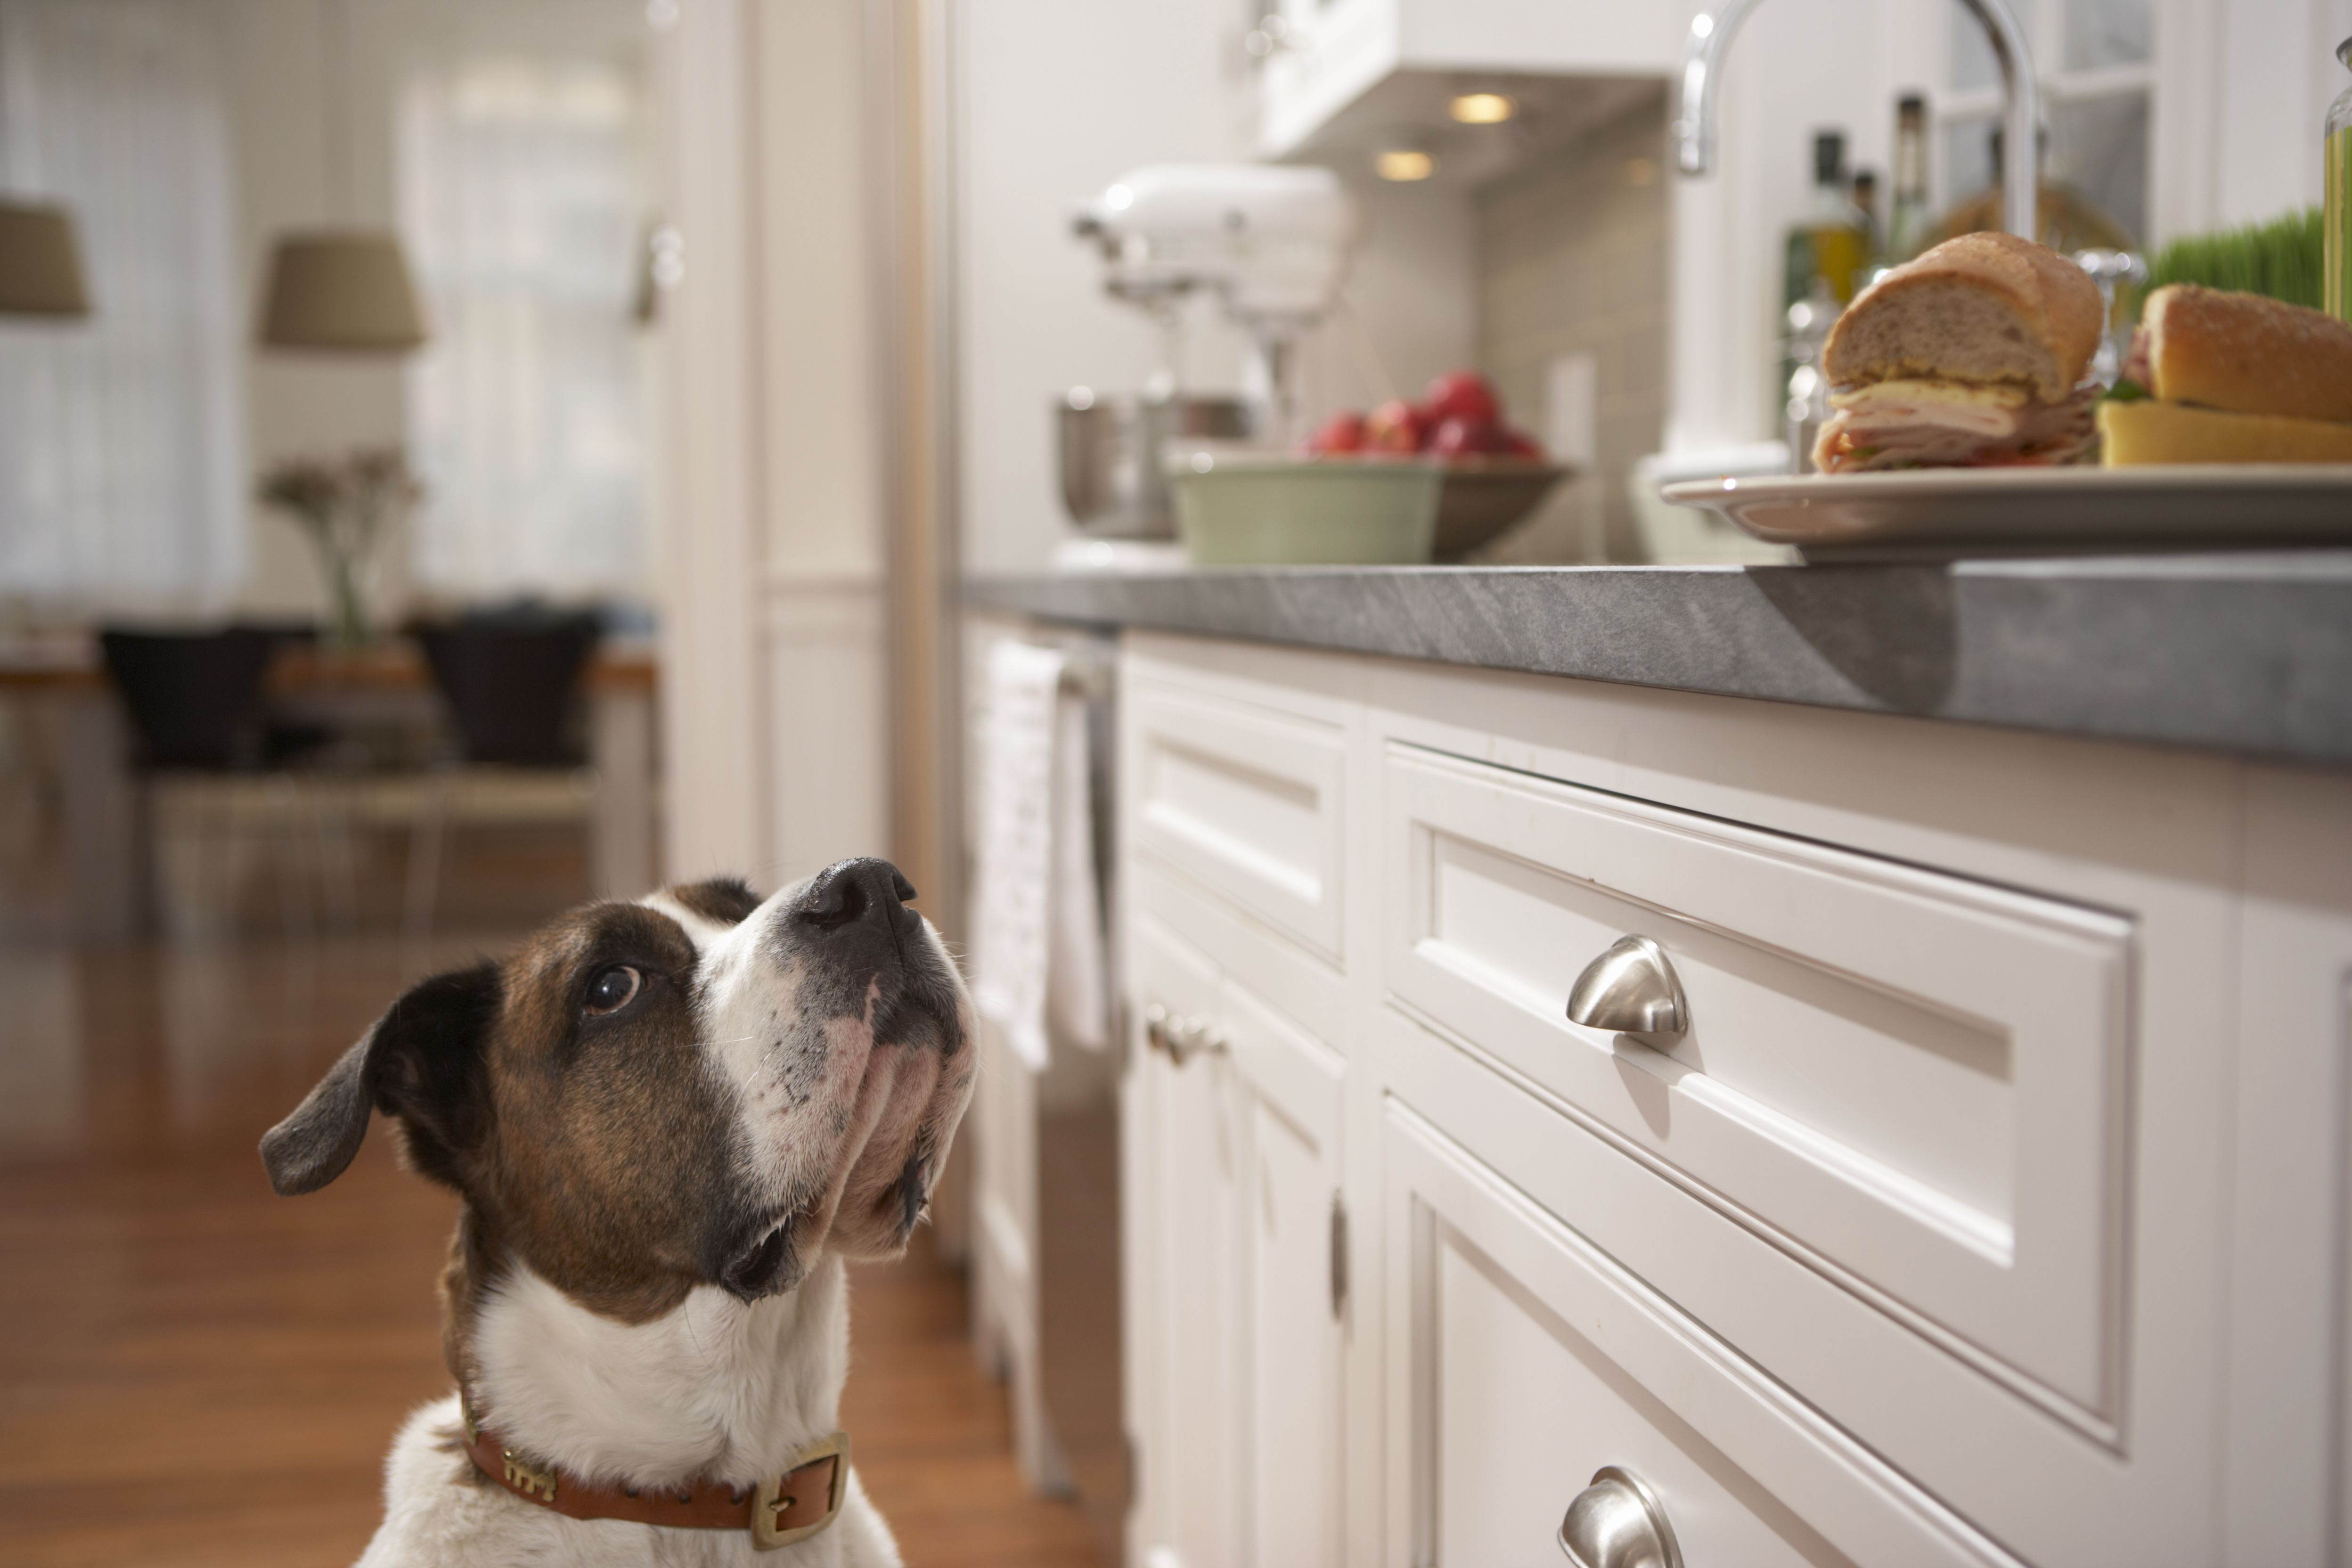 Pet Friendly Kitchen Design How To Design For Dogs At Home